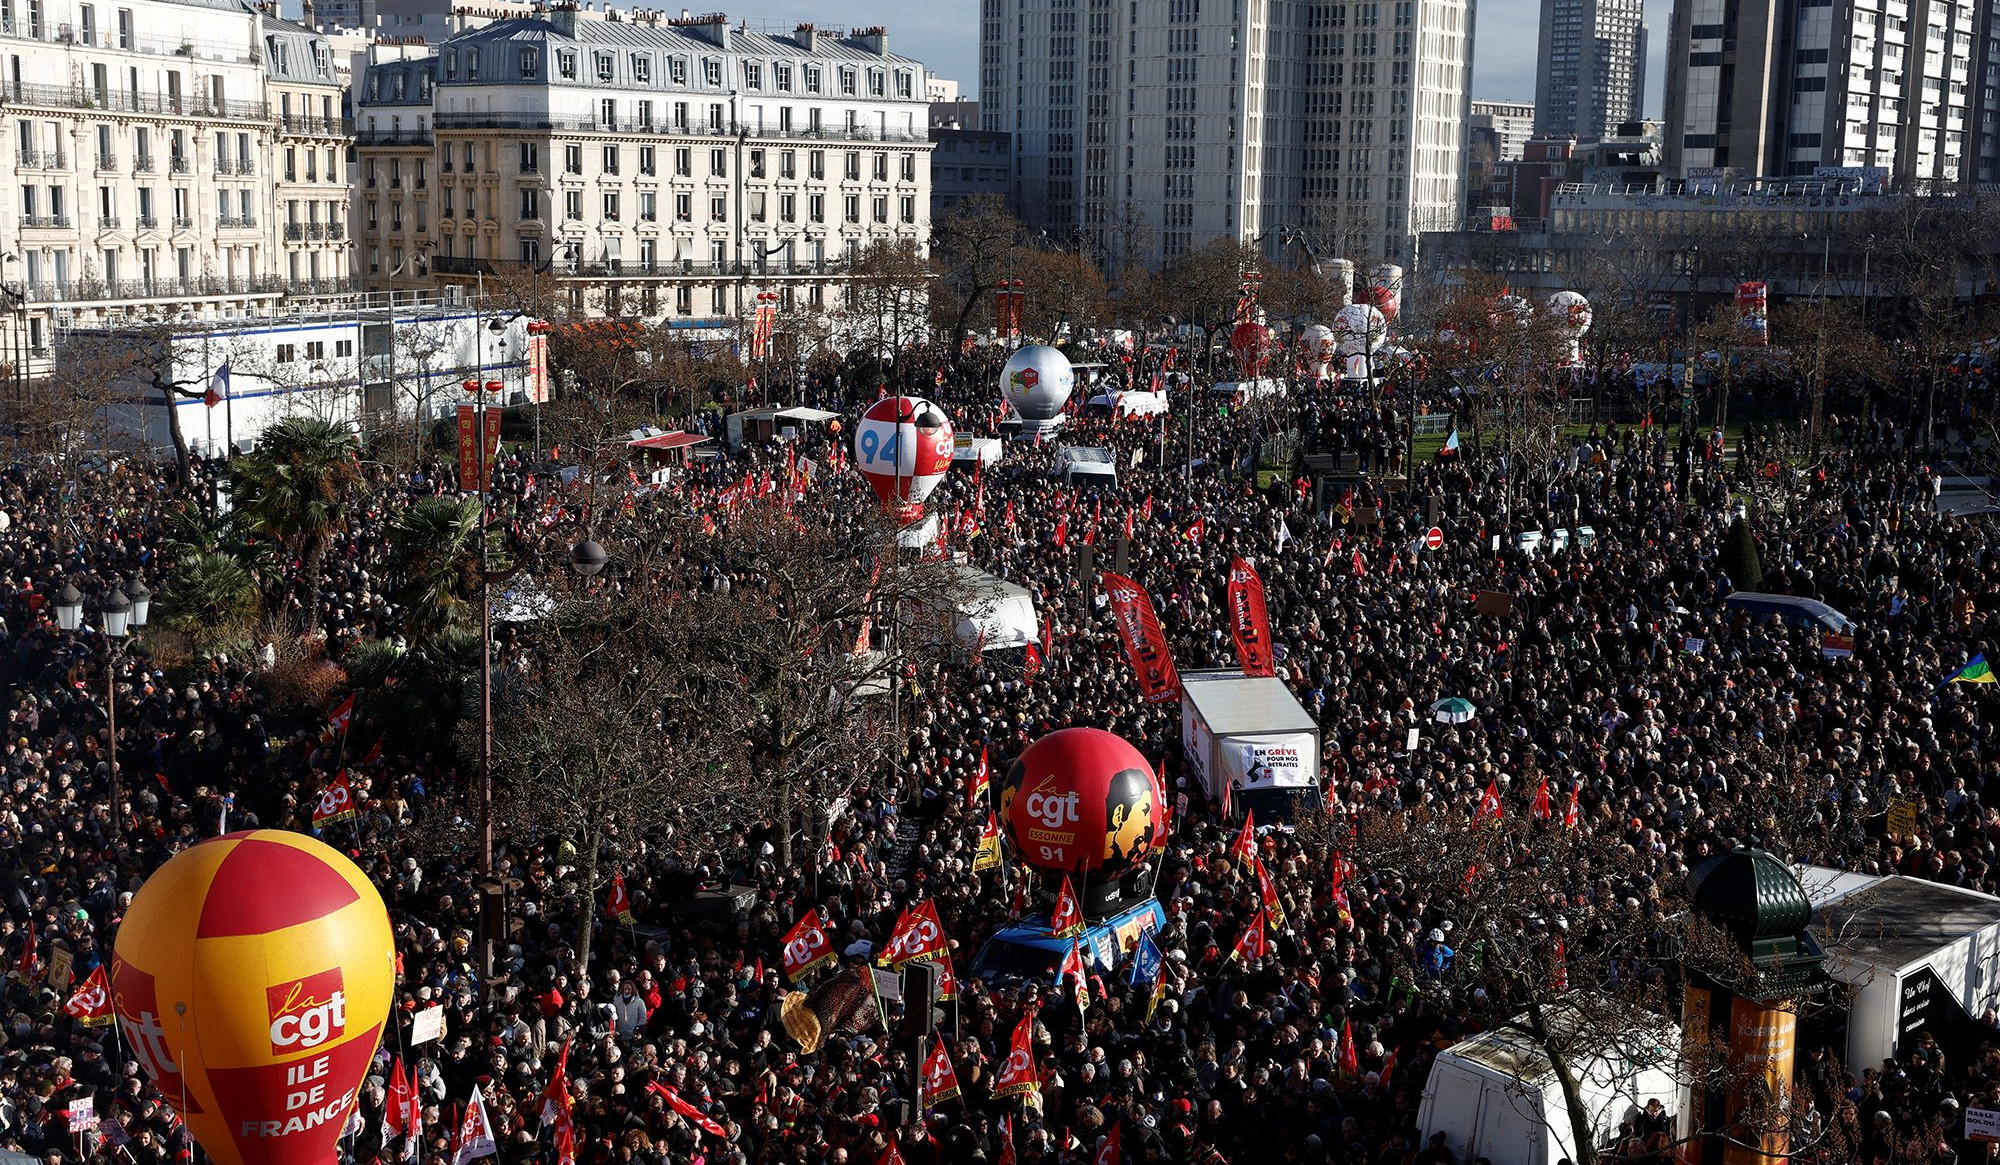 Raising pensions age is non-negotiable says French labour minister despite mass protests